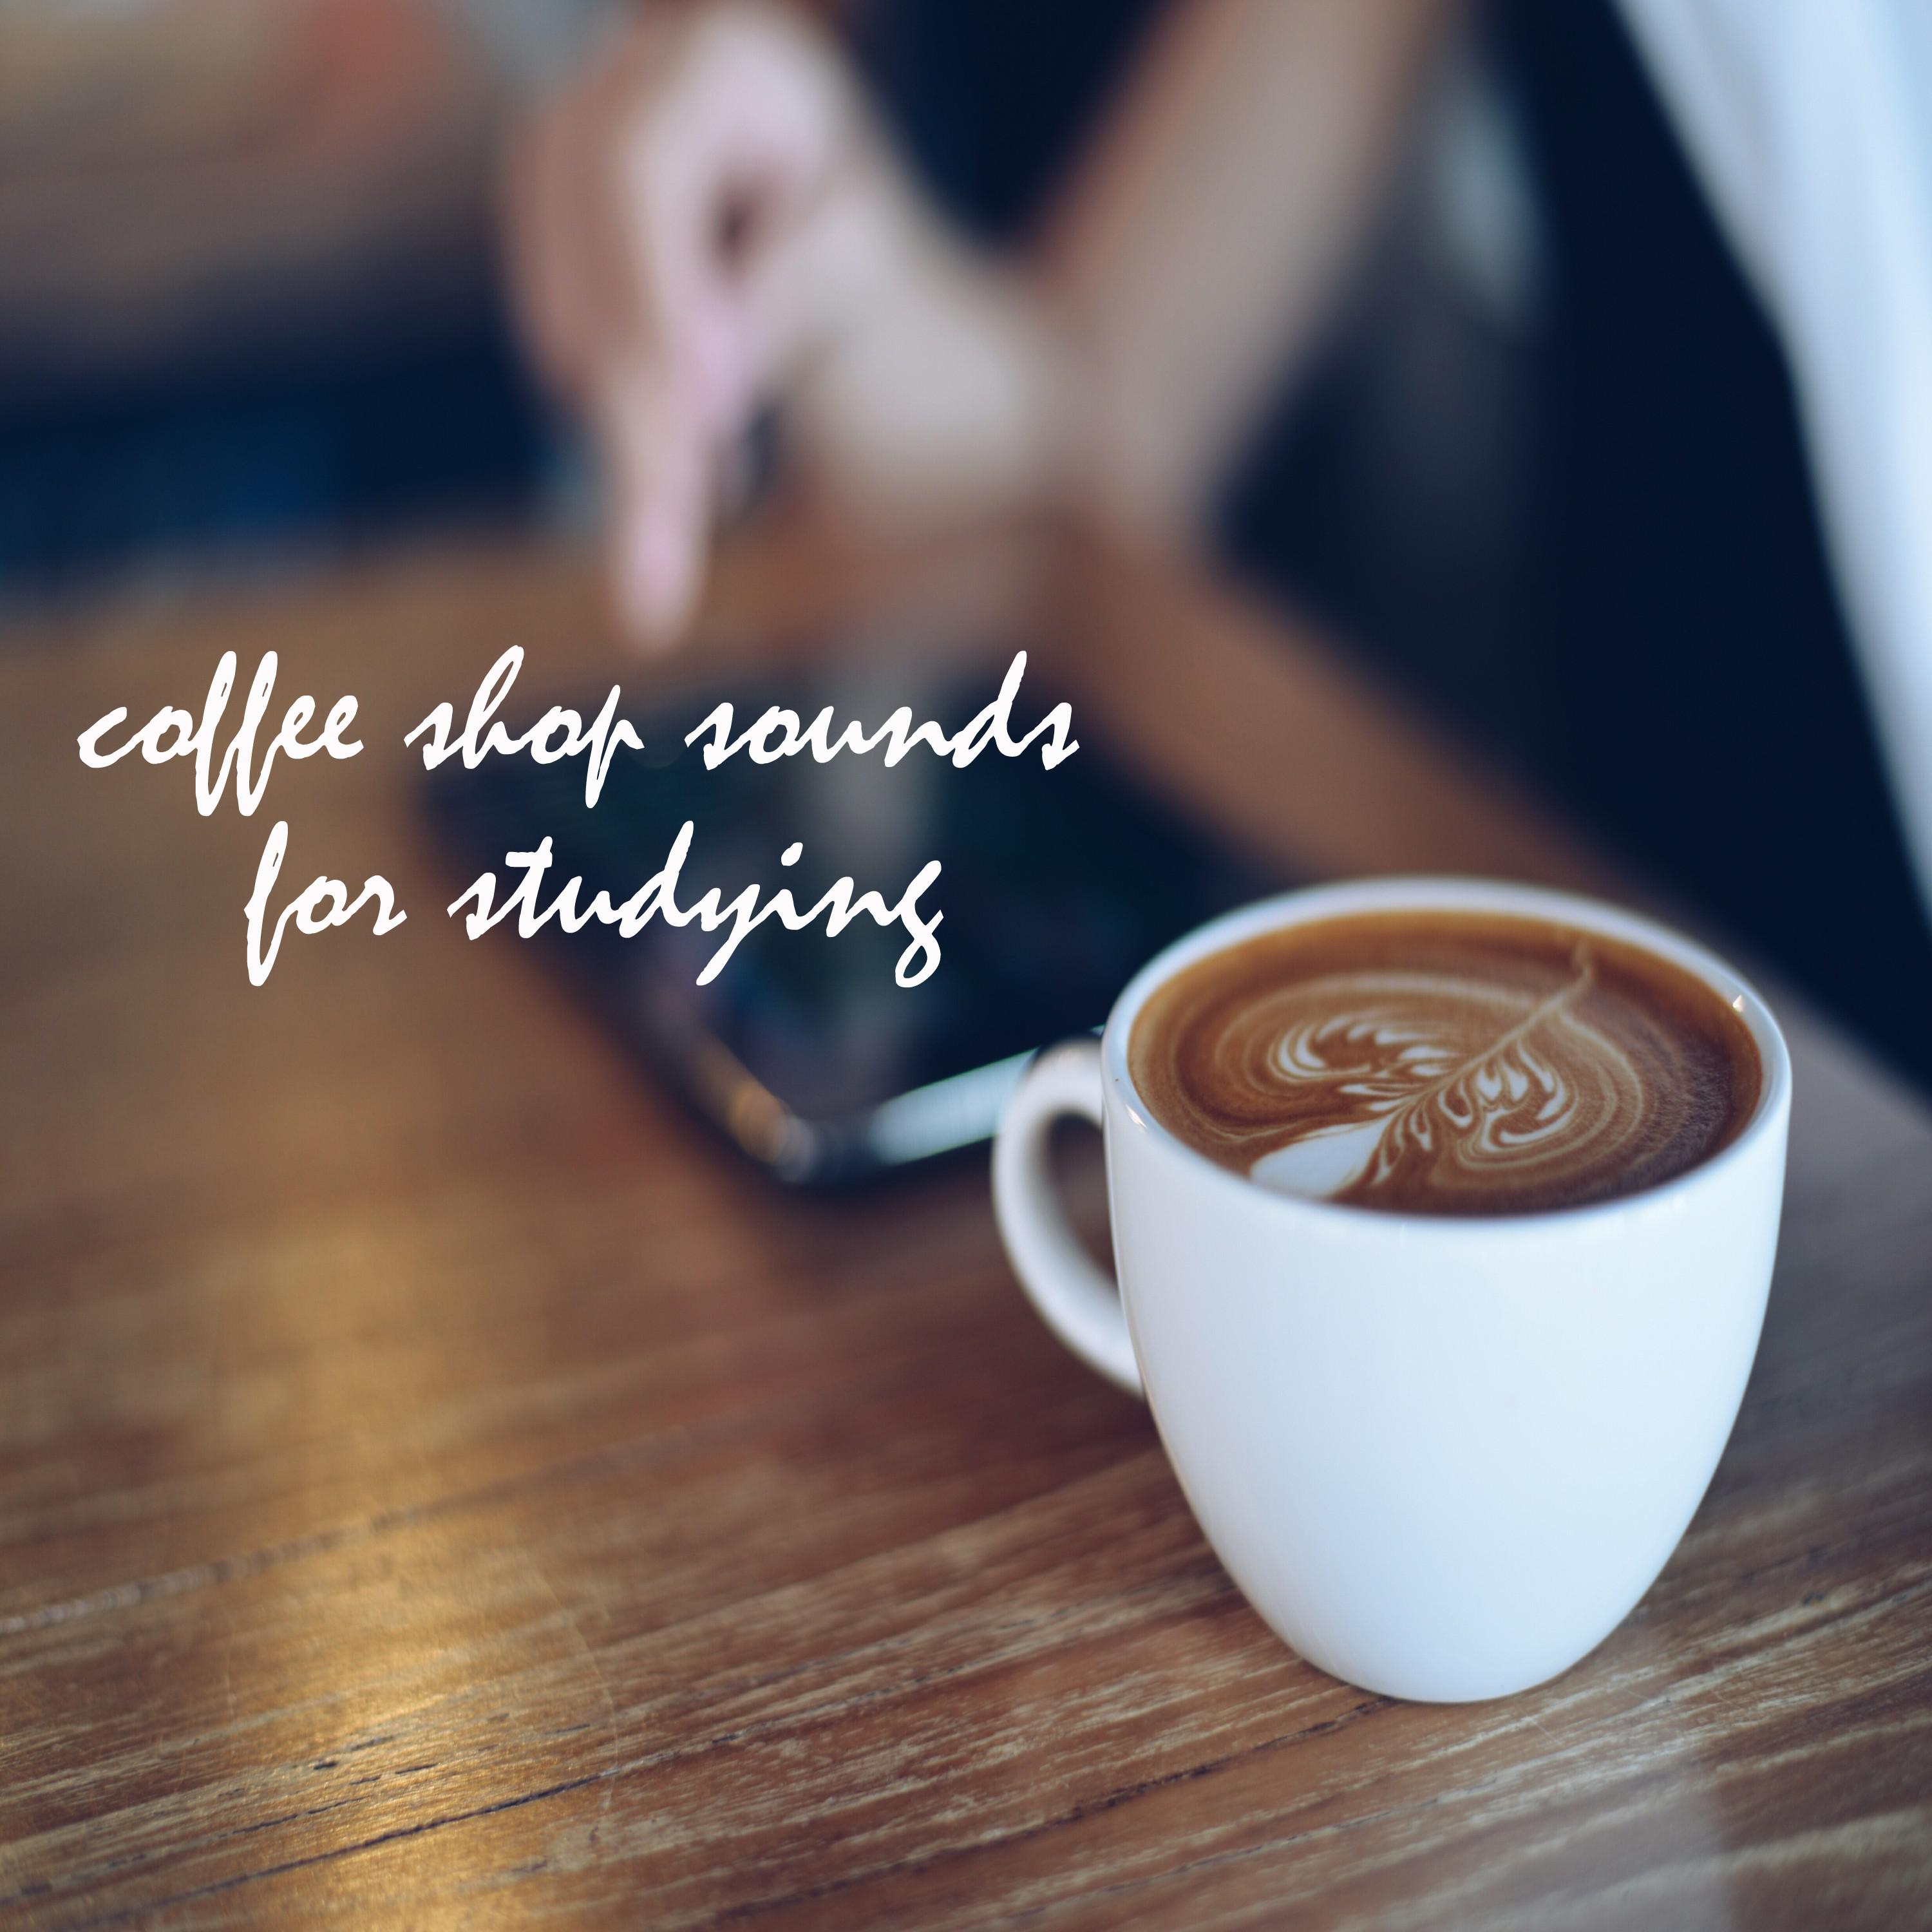 Coffee Shop Sounds for Studying and Working, Pt. 30